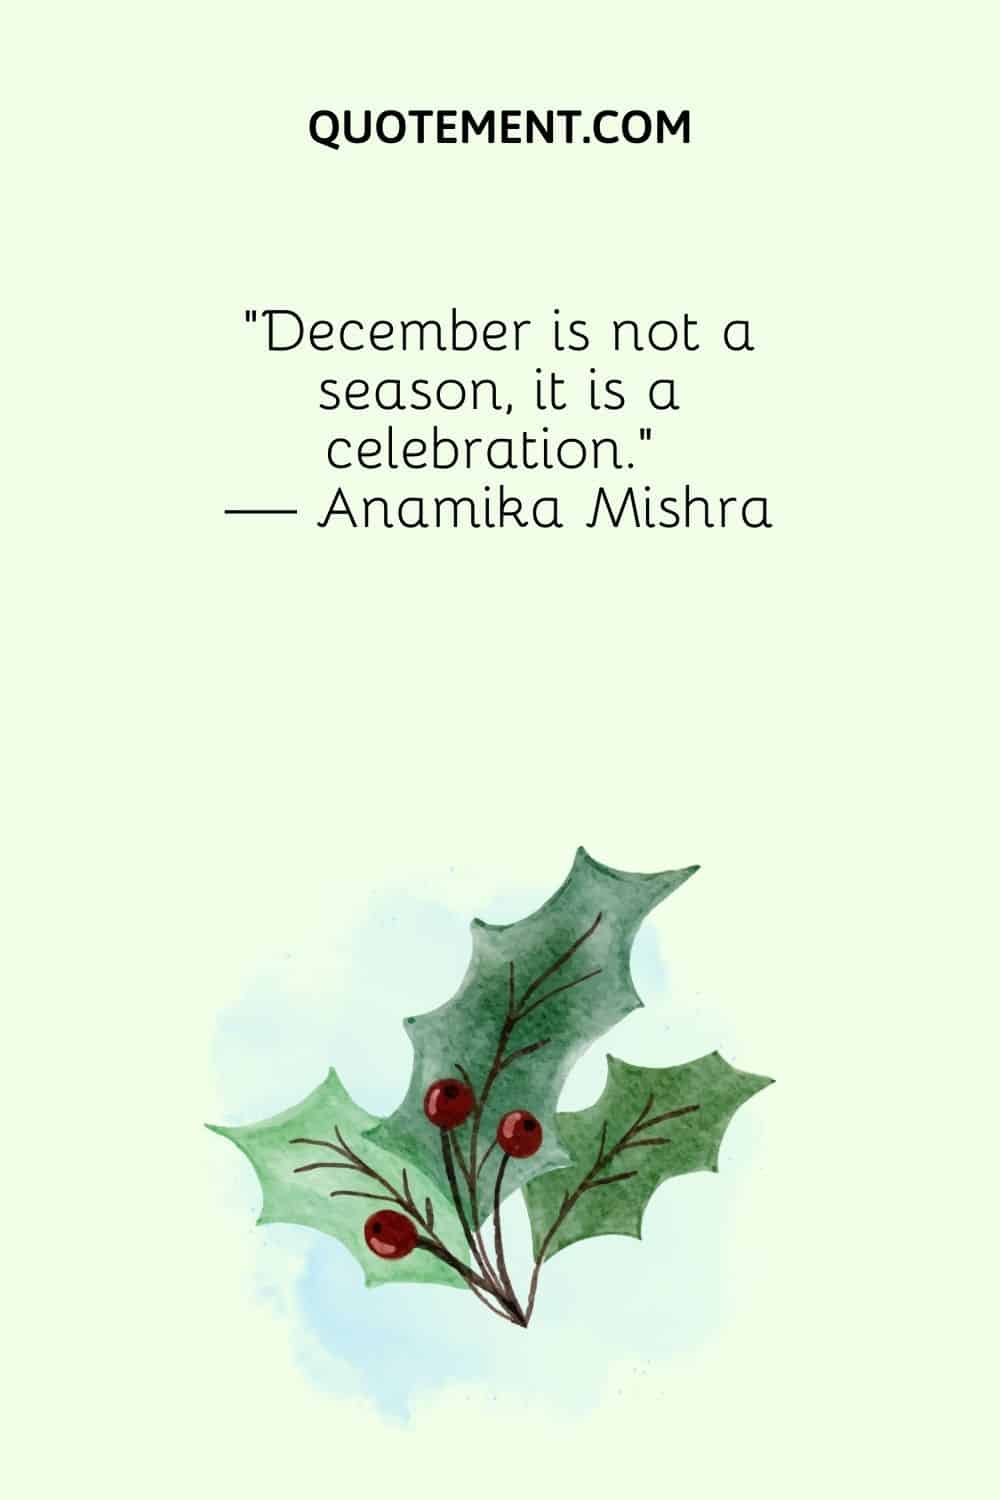 “December is not a season, it is a celebration.” — Anamika Mishra